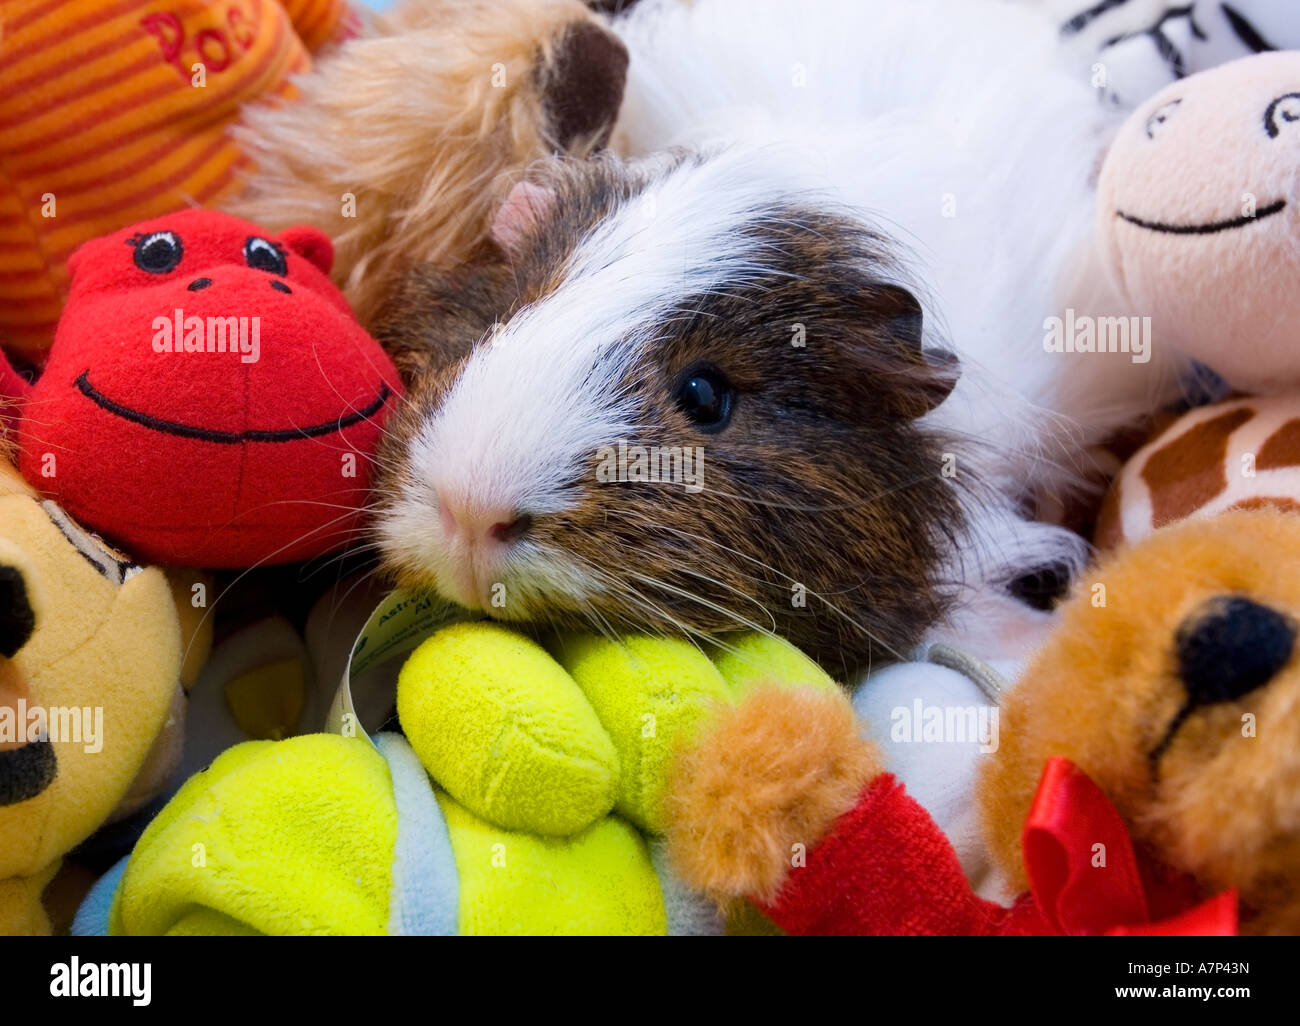 Guinea Pig Amongst childrens funny toys Stock Photo